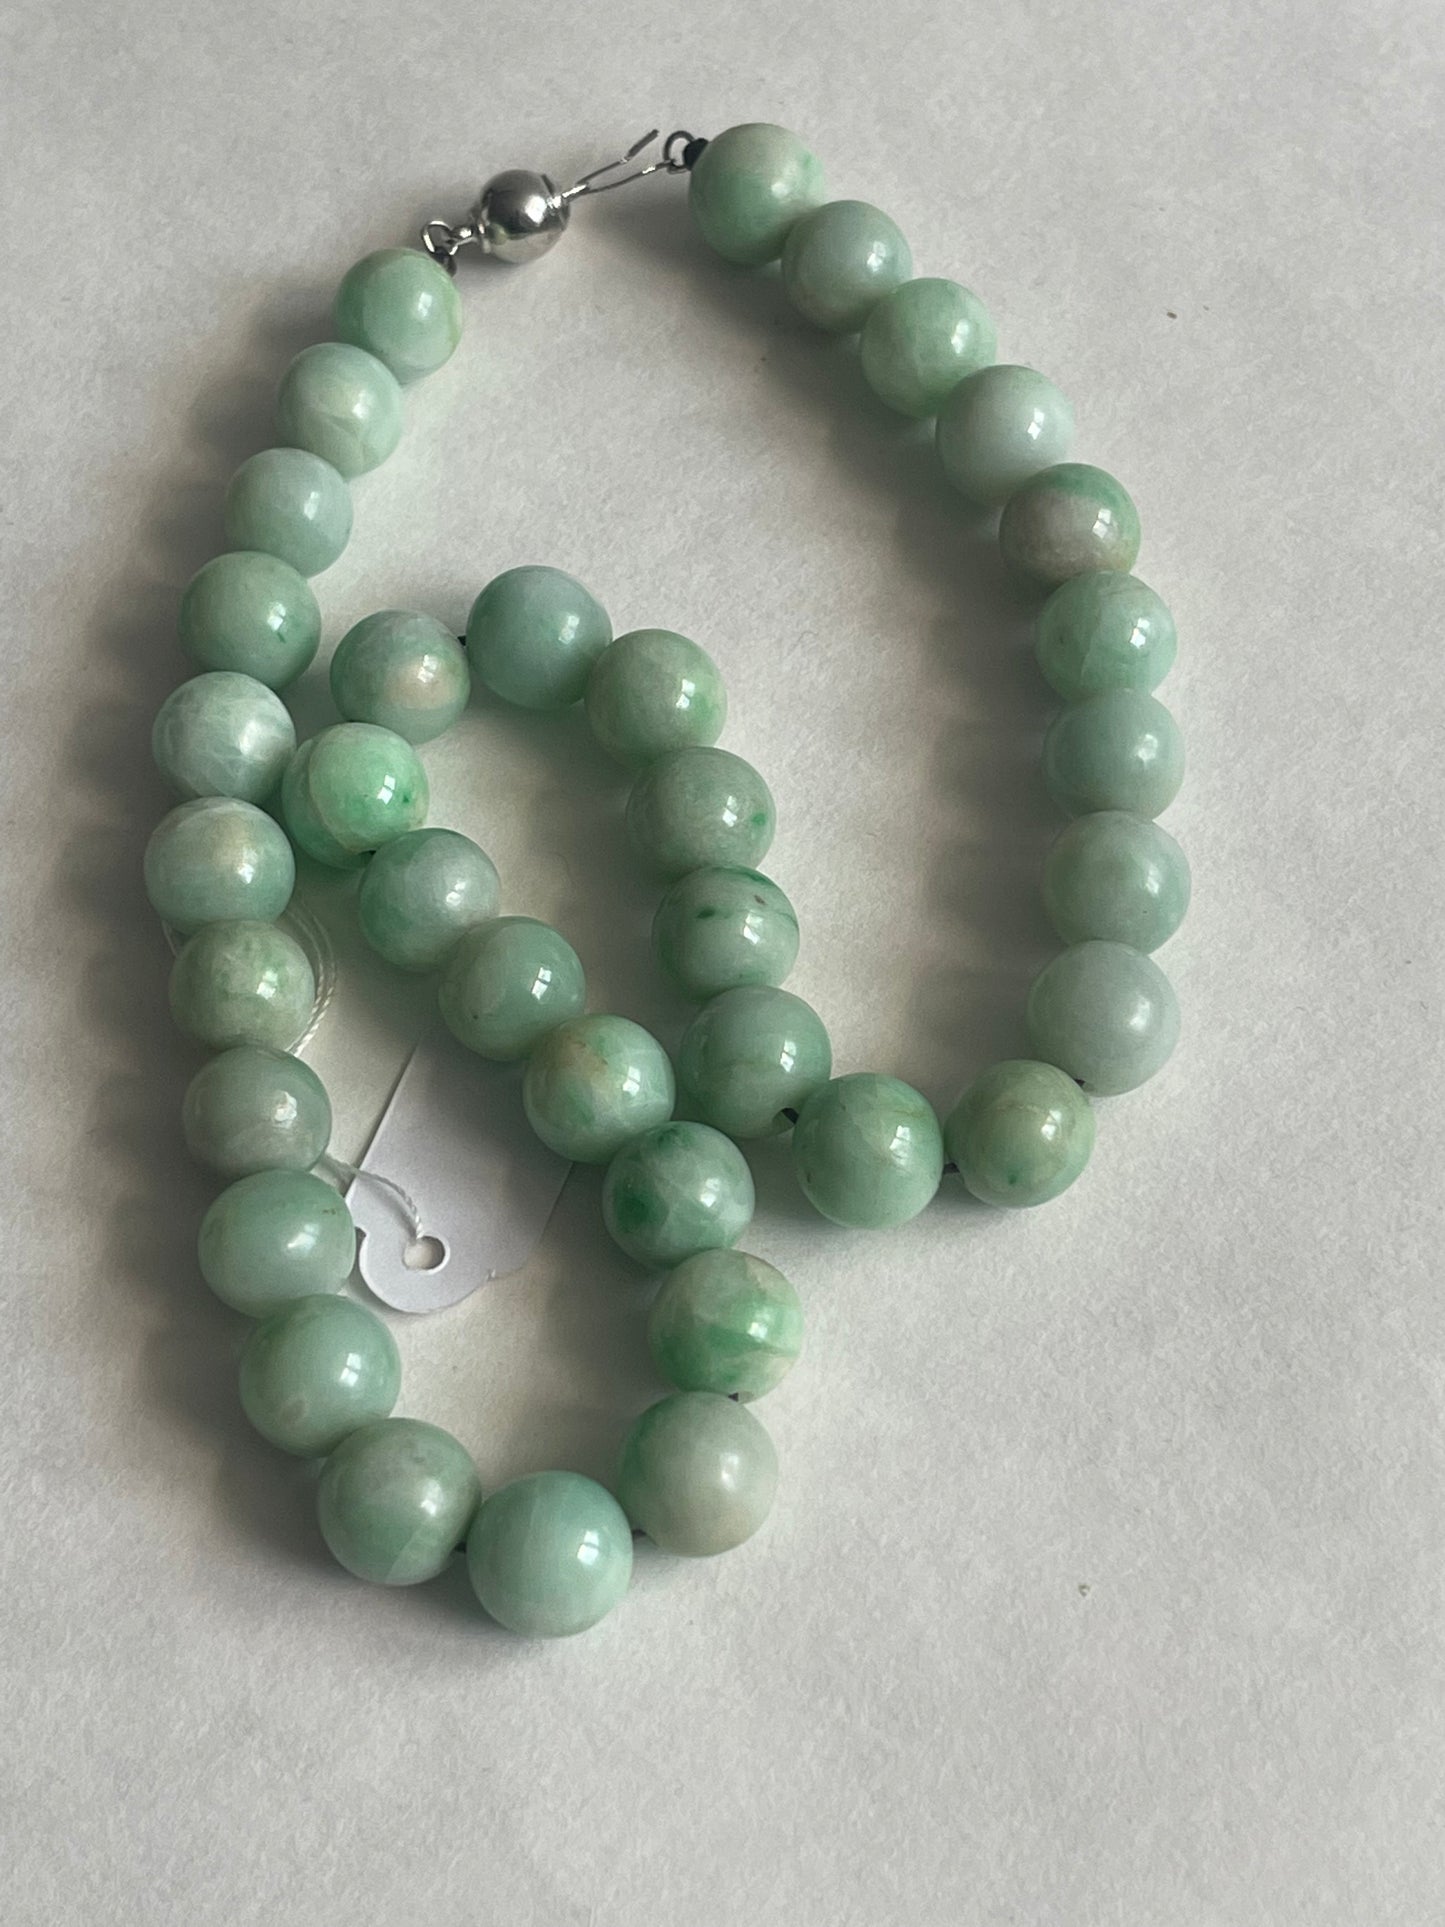 A necklace with vintage jade beads